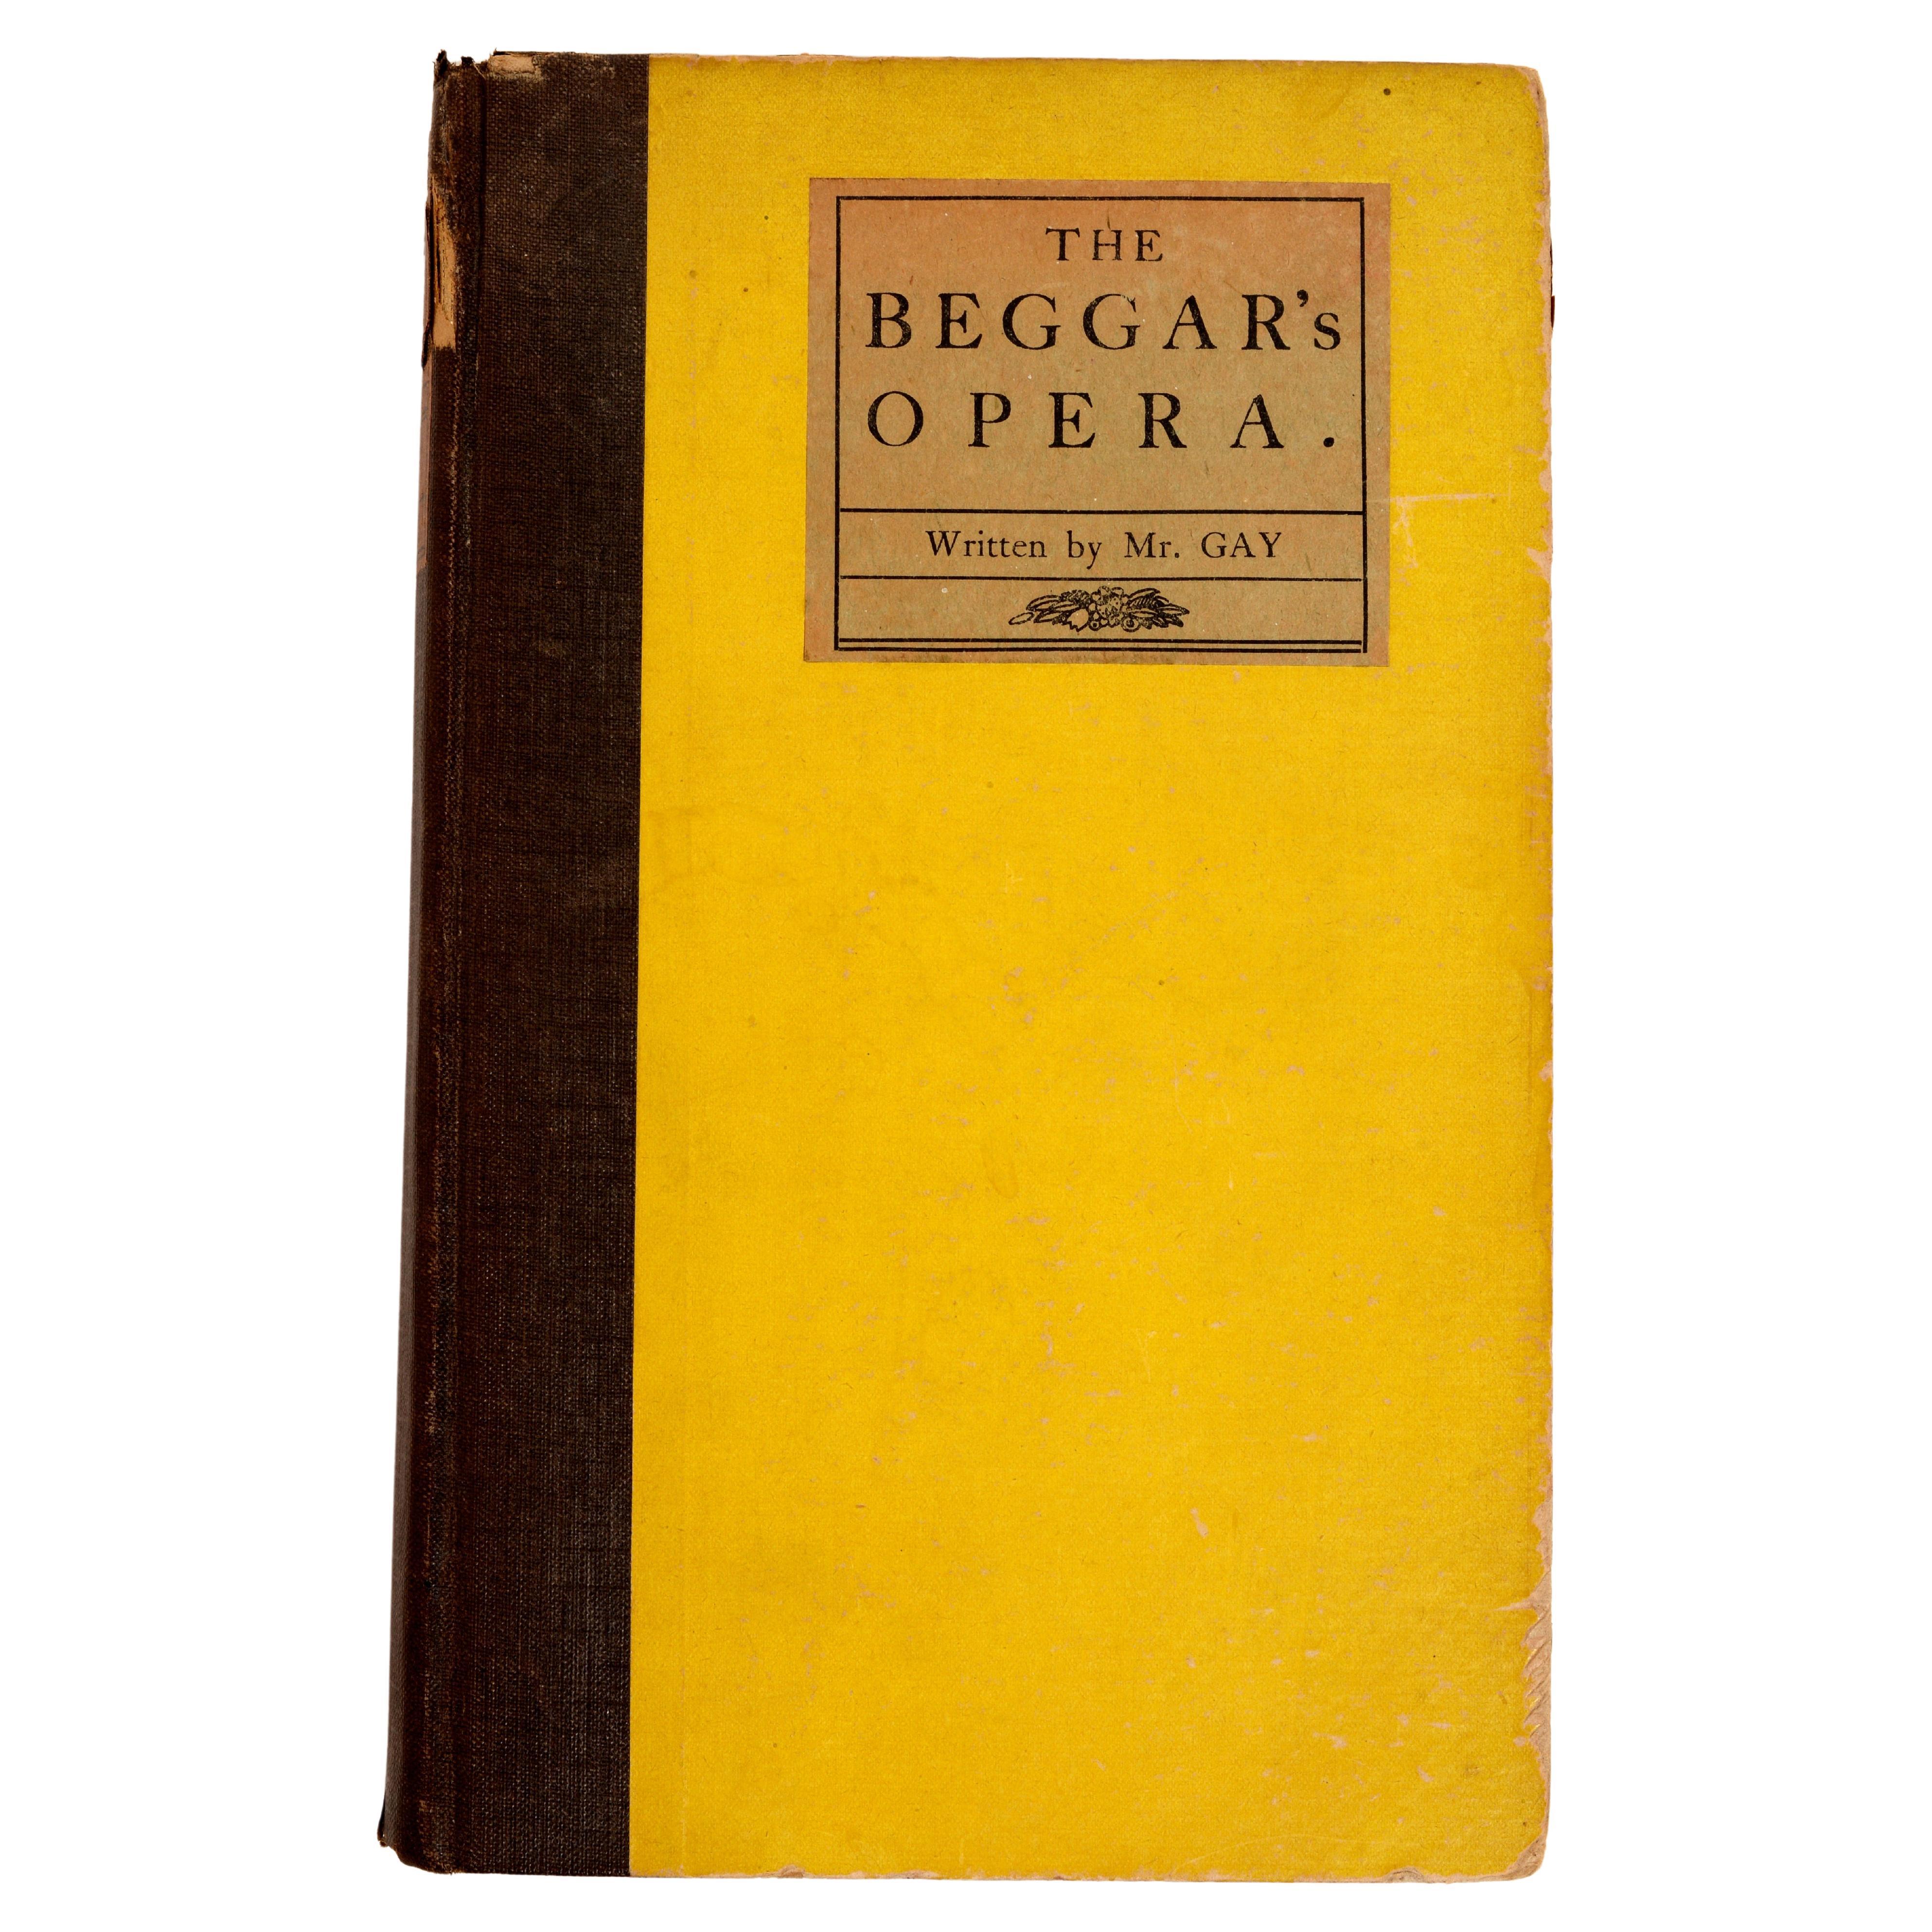 Beggar's Opera by Mr. Gay, Nelson Doubleday's Personal Copy with His Bookplate For Sale